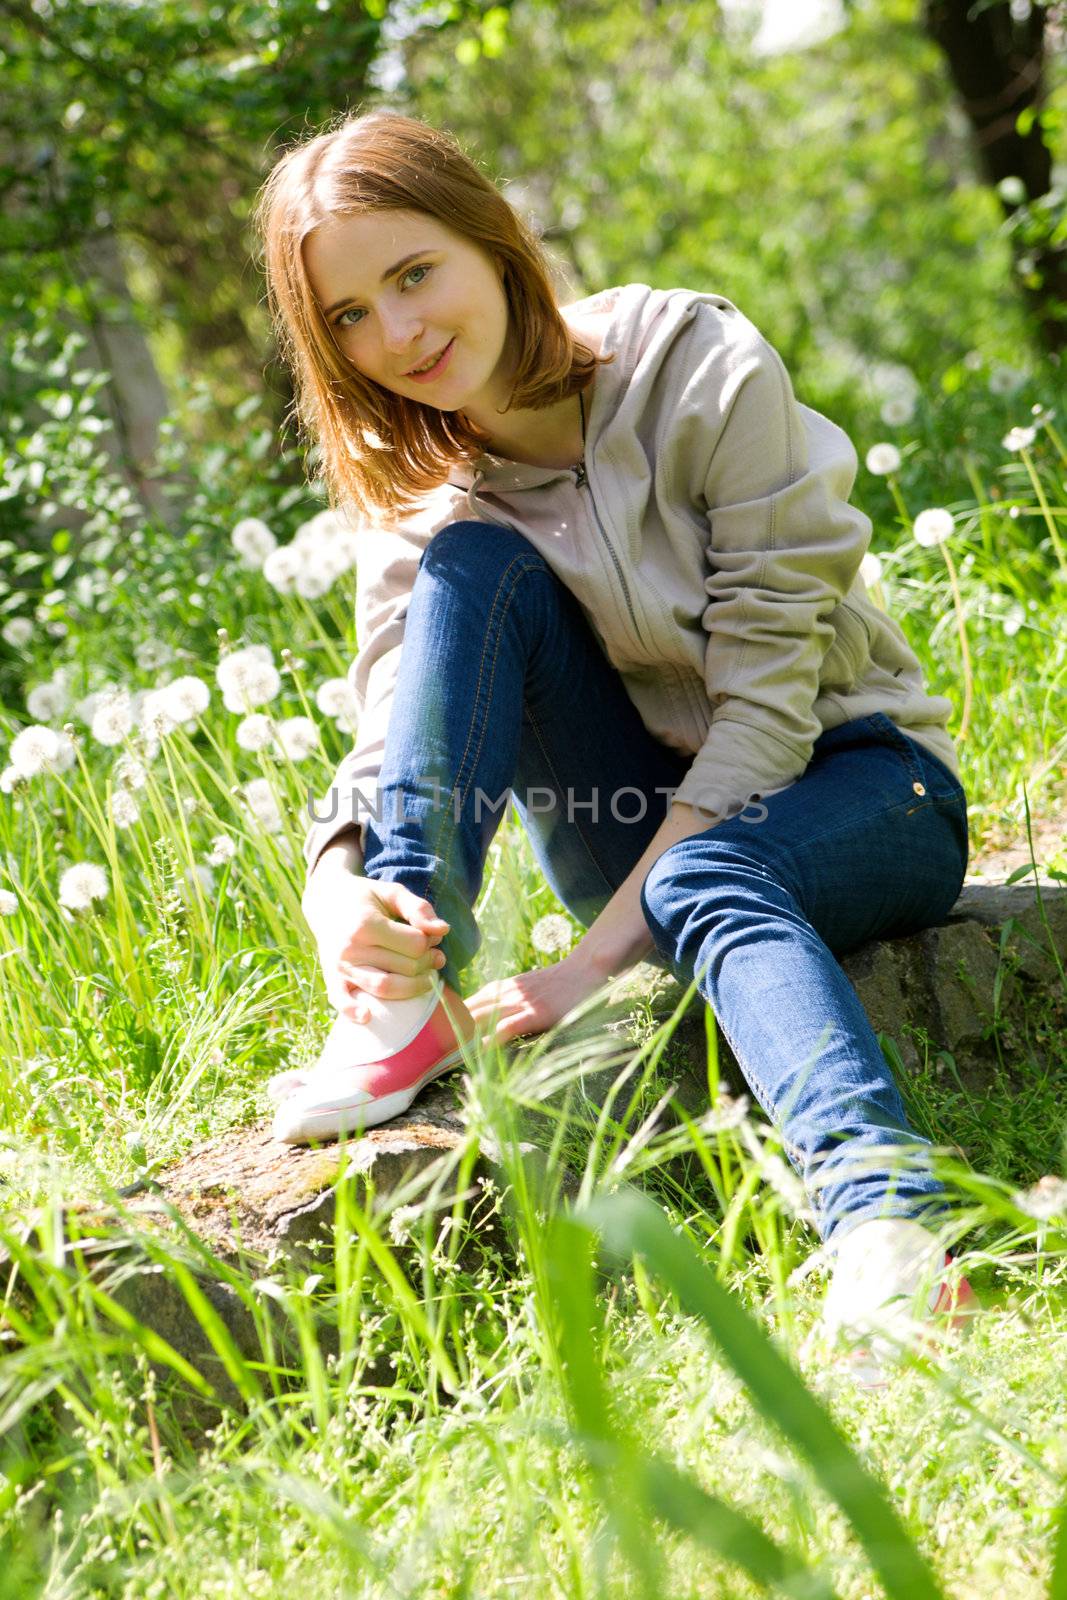 Portrait of a beautiful young woman sitting in dandelions